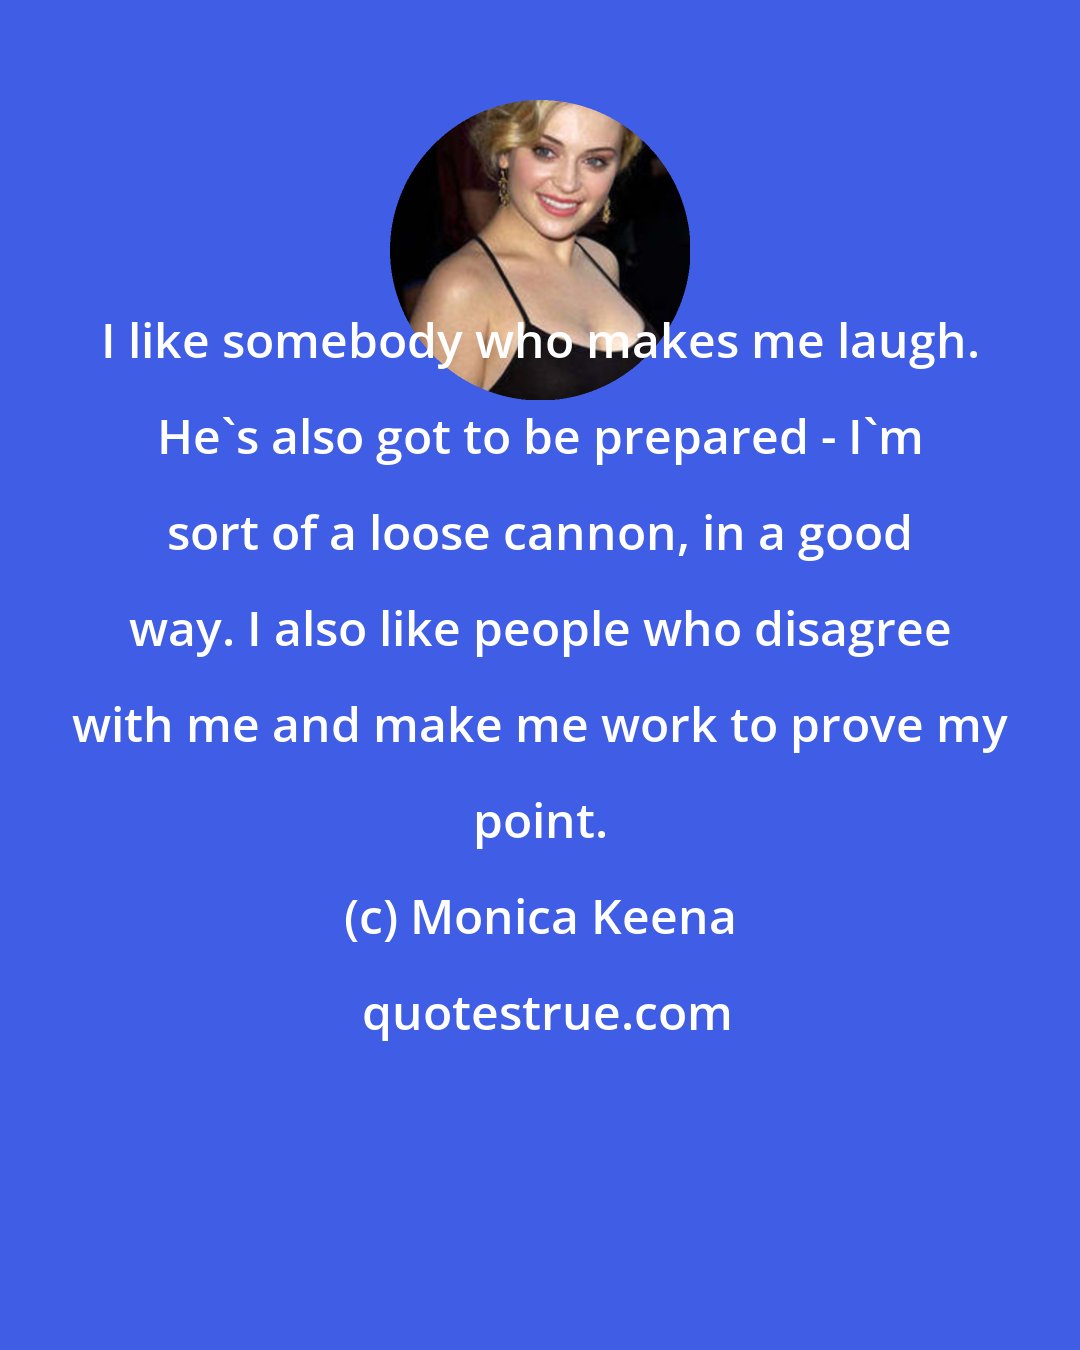 Monica Keena: I like somebody who makes me laugh. He's also got to be prepared - I'm sort of a loose cannon, in a good way. I also like people who disagree with me and make me work to prove my point.